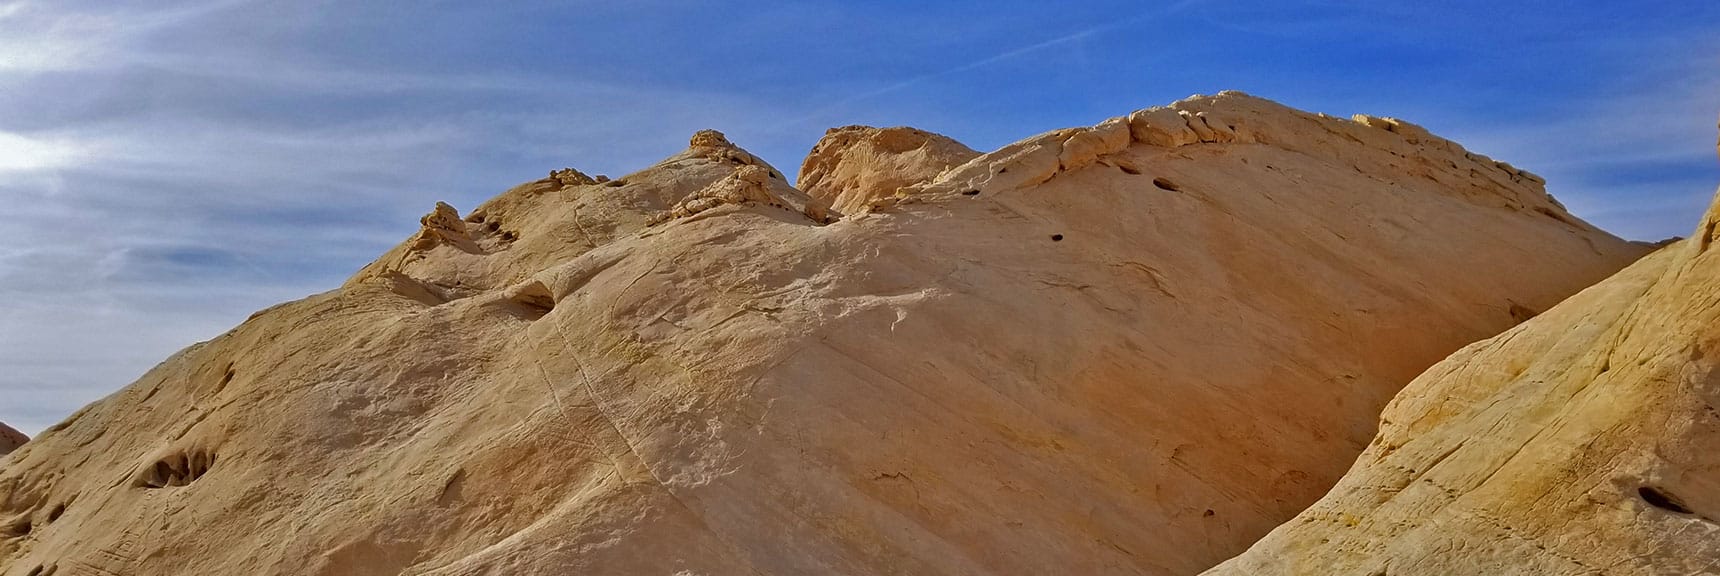 Rounding and Exploring Silica Dome in Valley of Fire State Park, Nevada